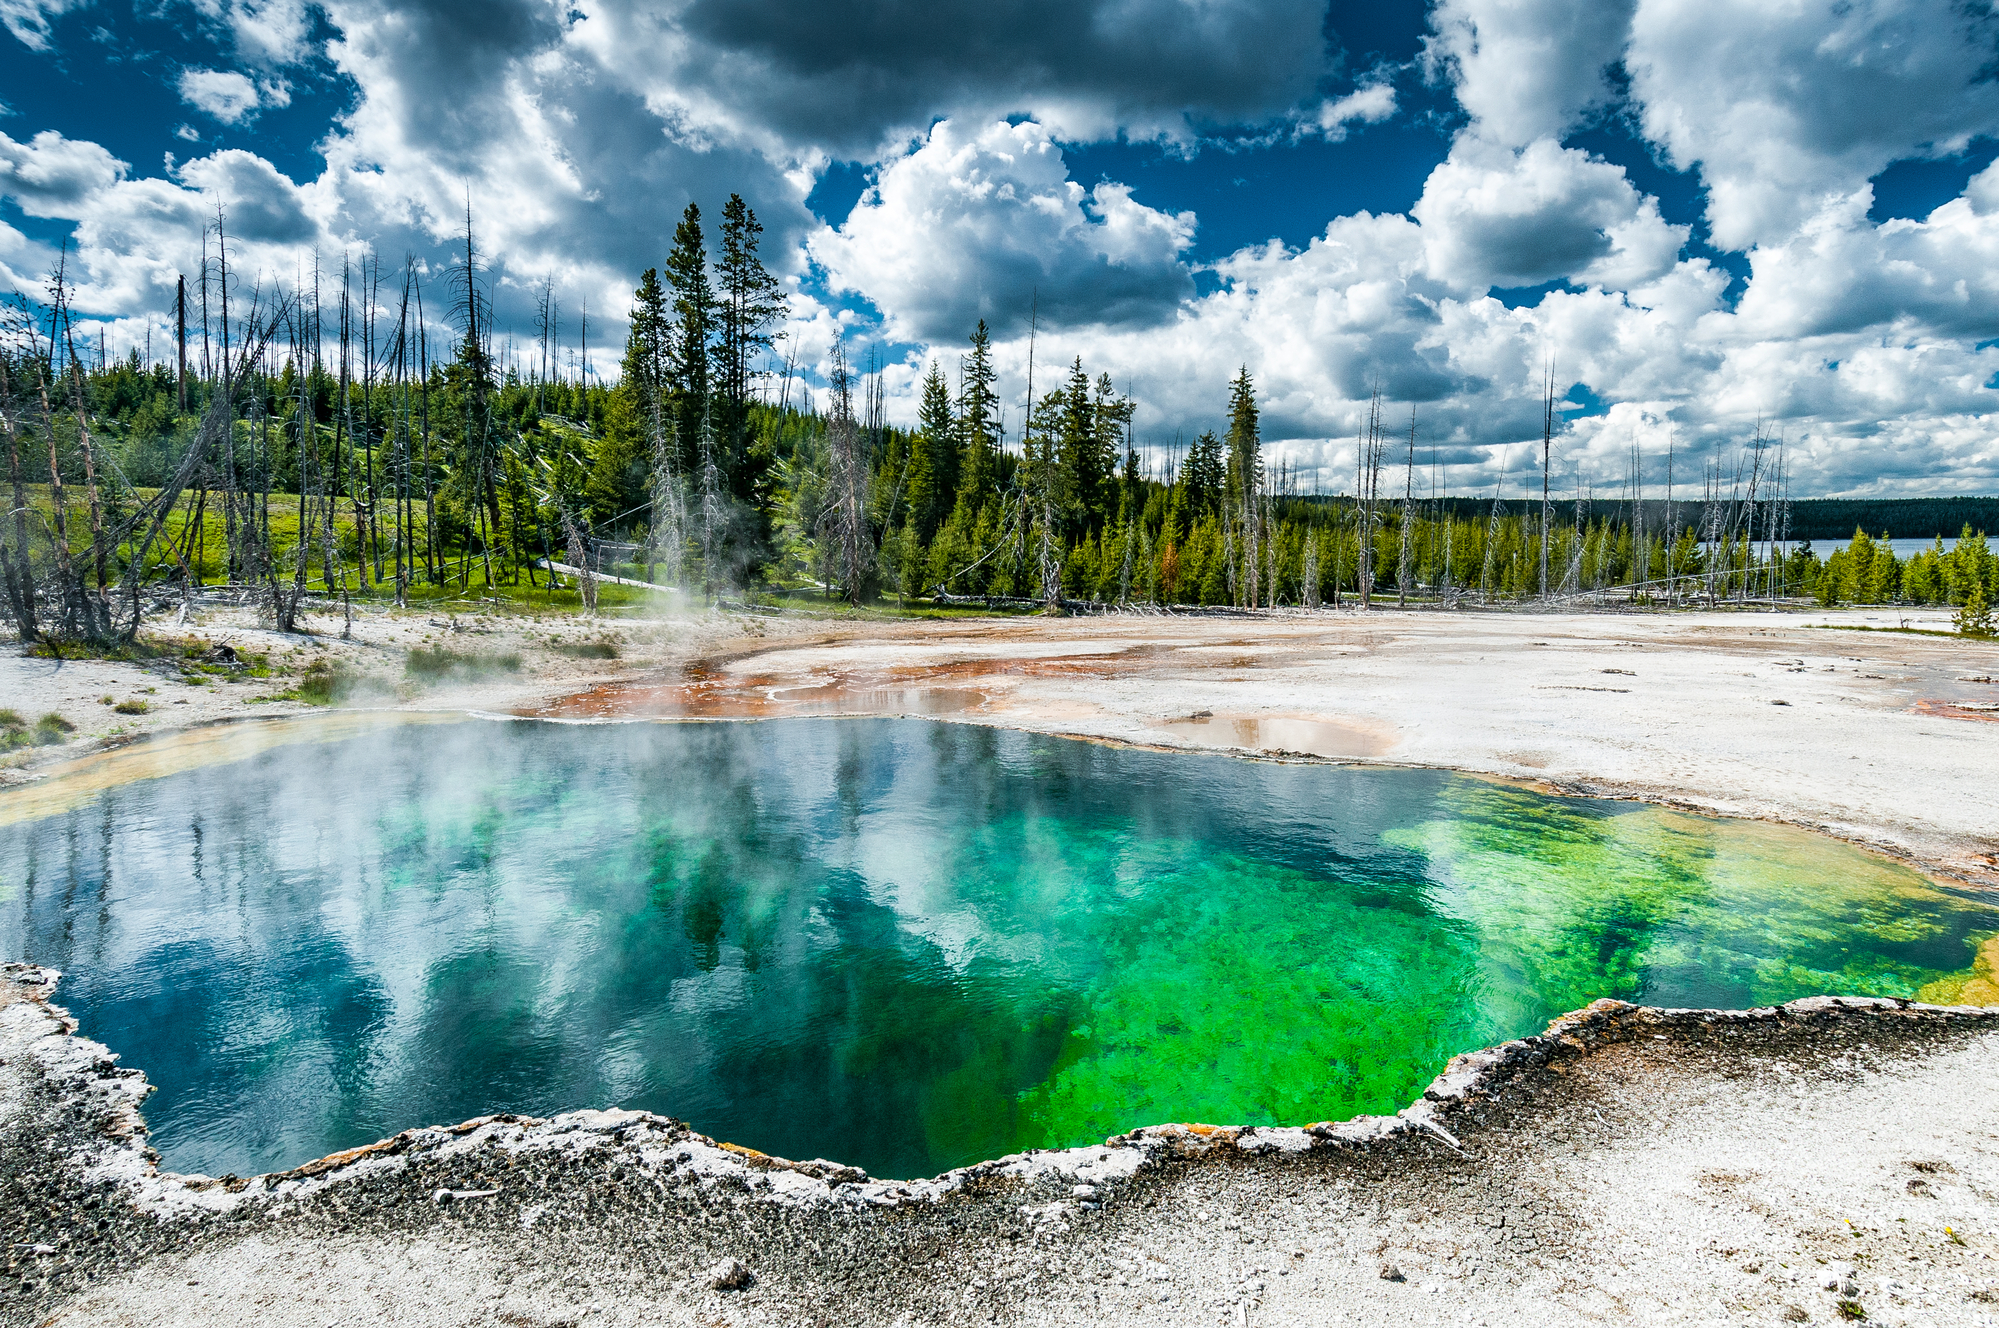 Basin of colorful hot water and sulfur emanation in the area of West Thumb Geyser Basin, Yellowstone National Park